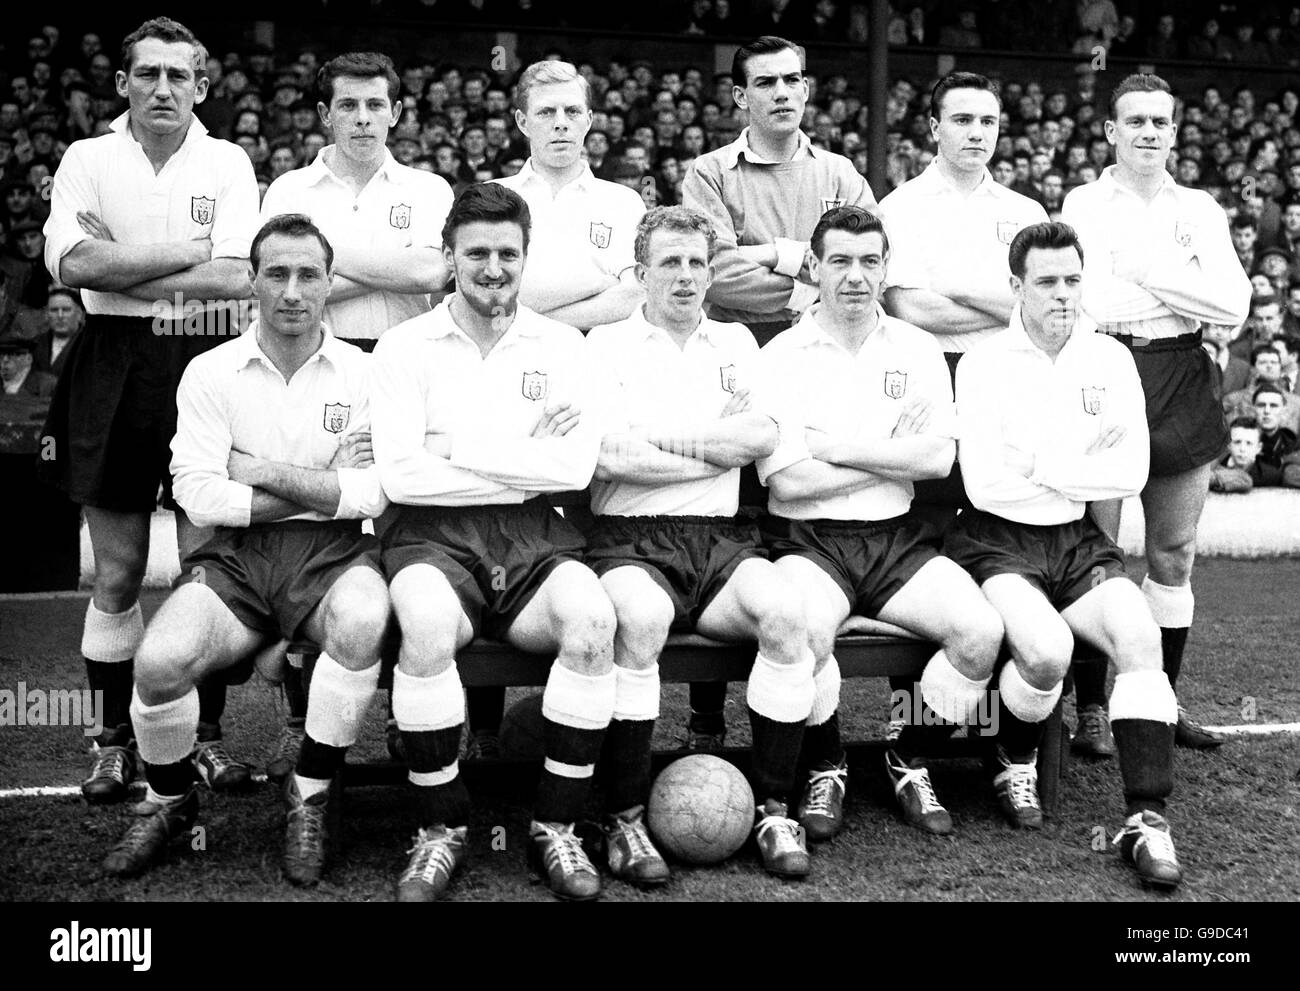 A team phot of Fulham Football Club, battling for promotion to the First Division. Left to right: Back row - Bentley, Alan Mullery, Lawler, Macedo, Cohen, and Langley. Front row - Barton, Jimmy Hill, Cook, Haynes and Leggat. Stock Photo